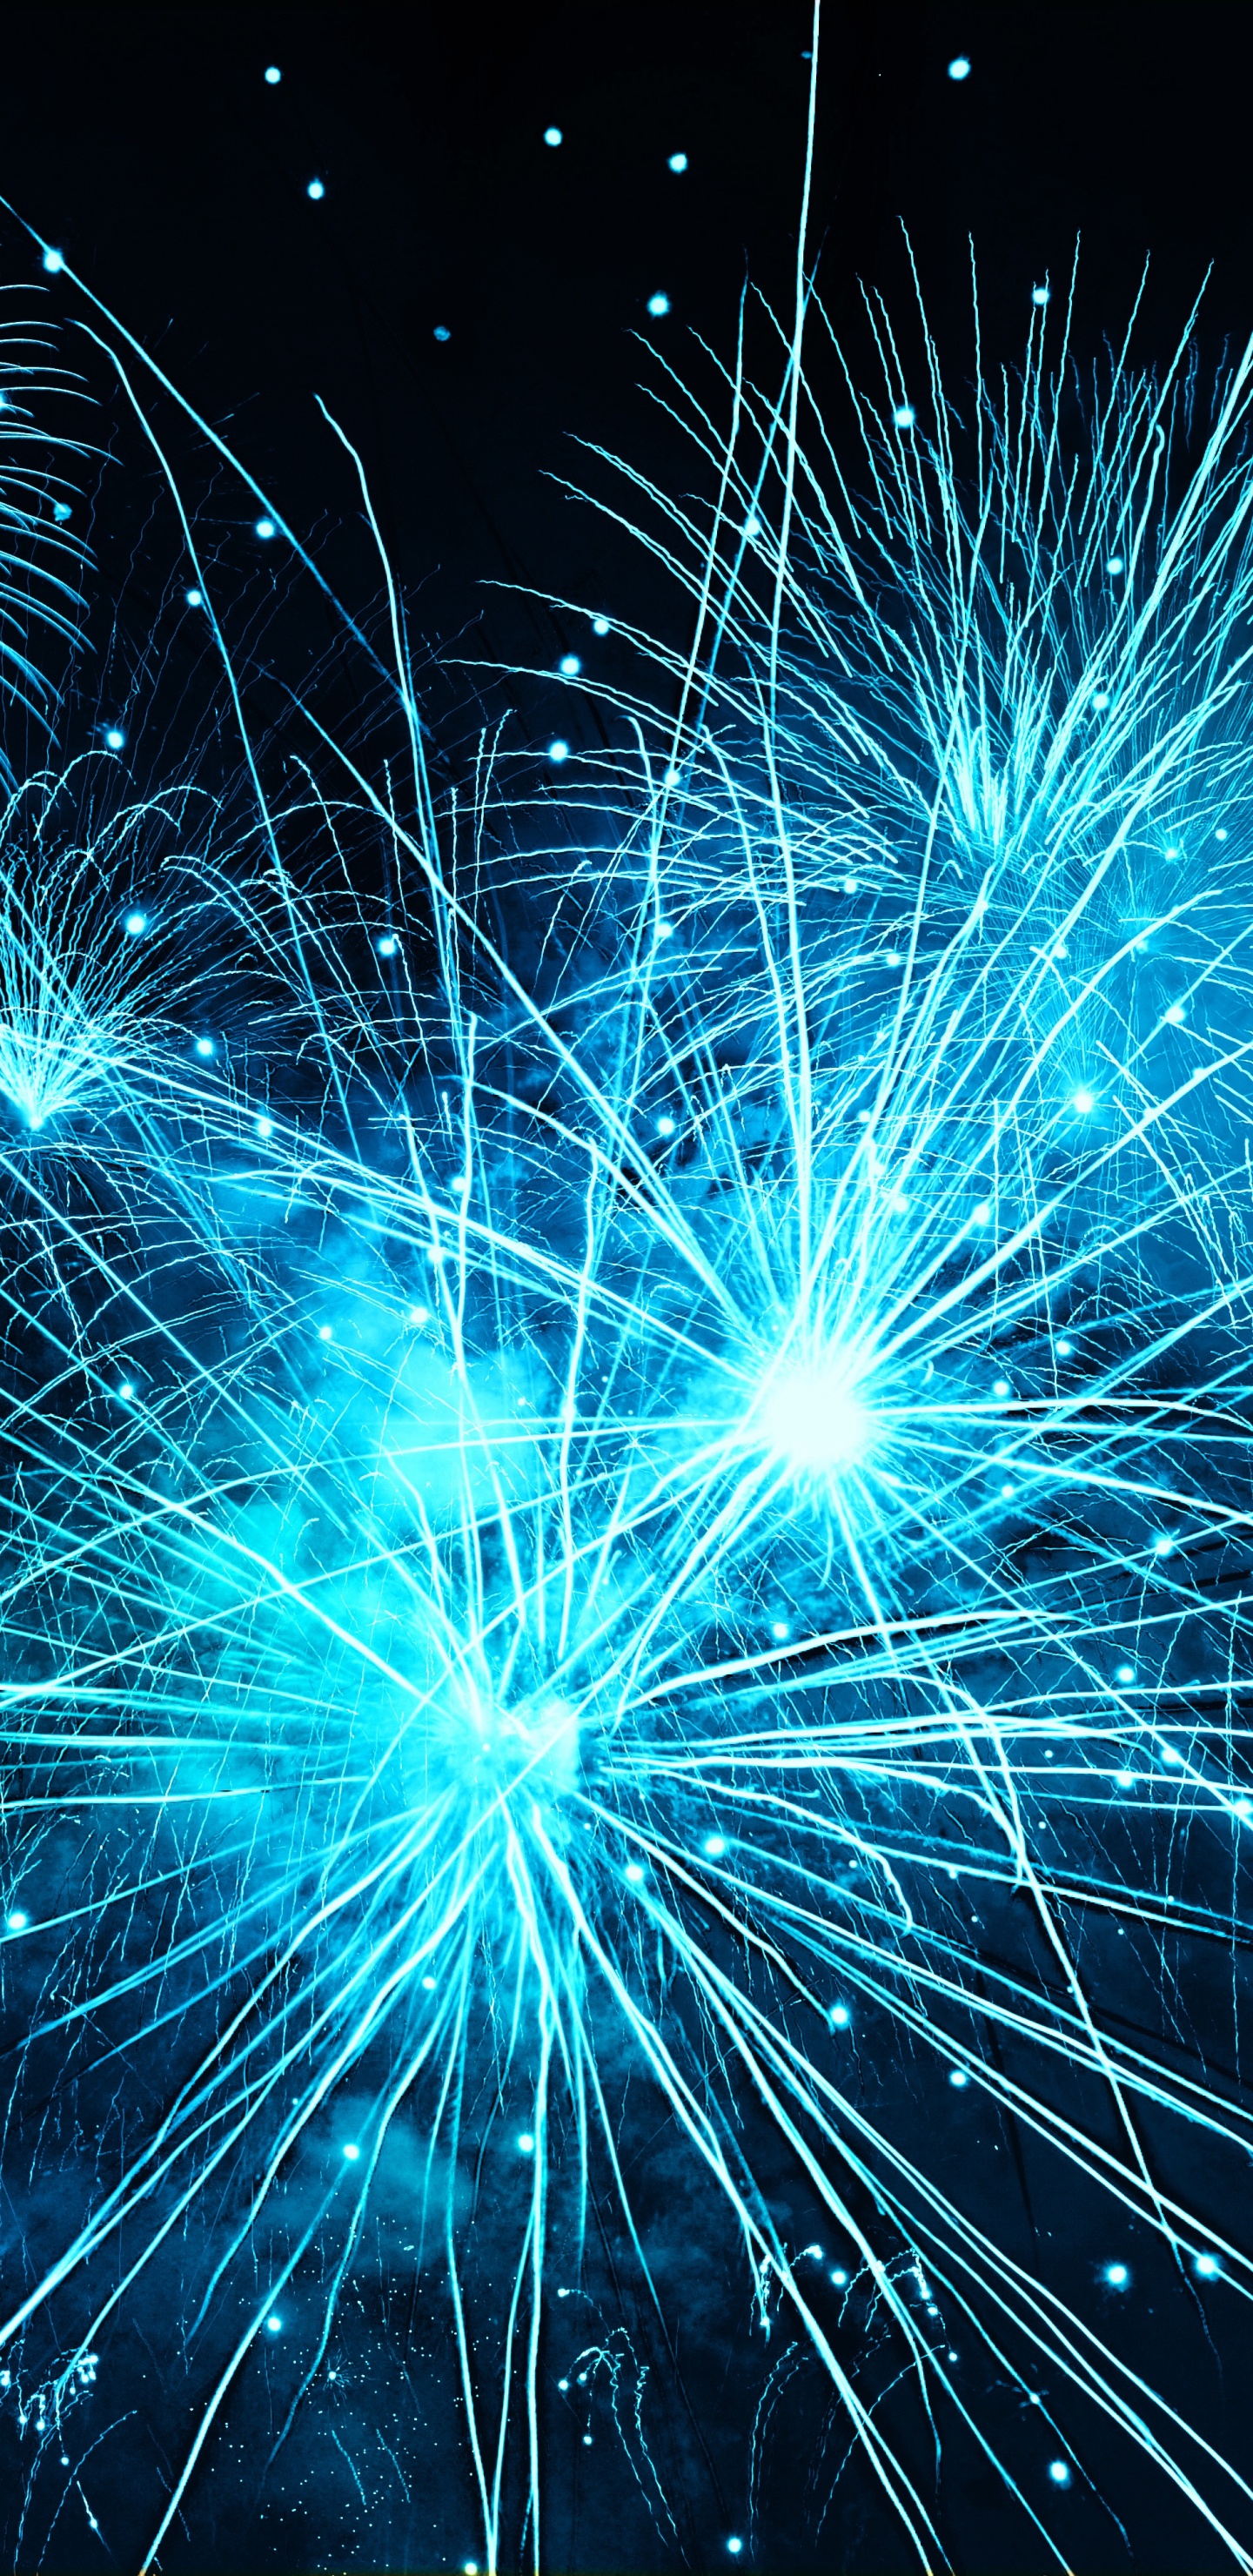 New Years Eve, New Year, New Years Day, Party, Fireworks. Wallpaper in 1440x2960 Resolution